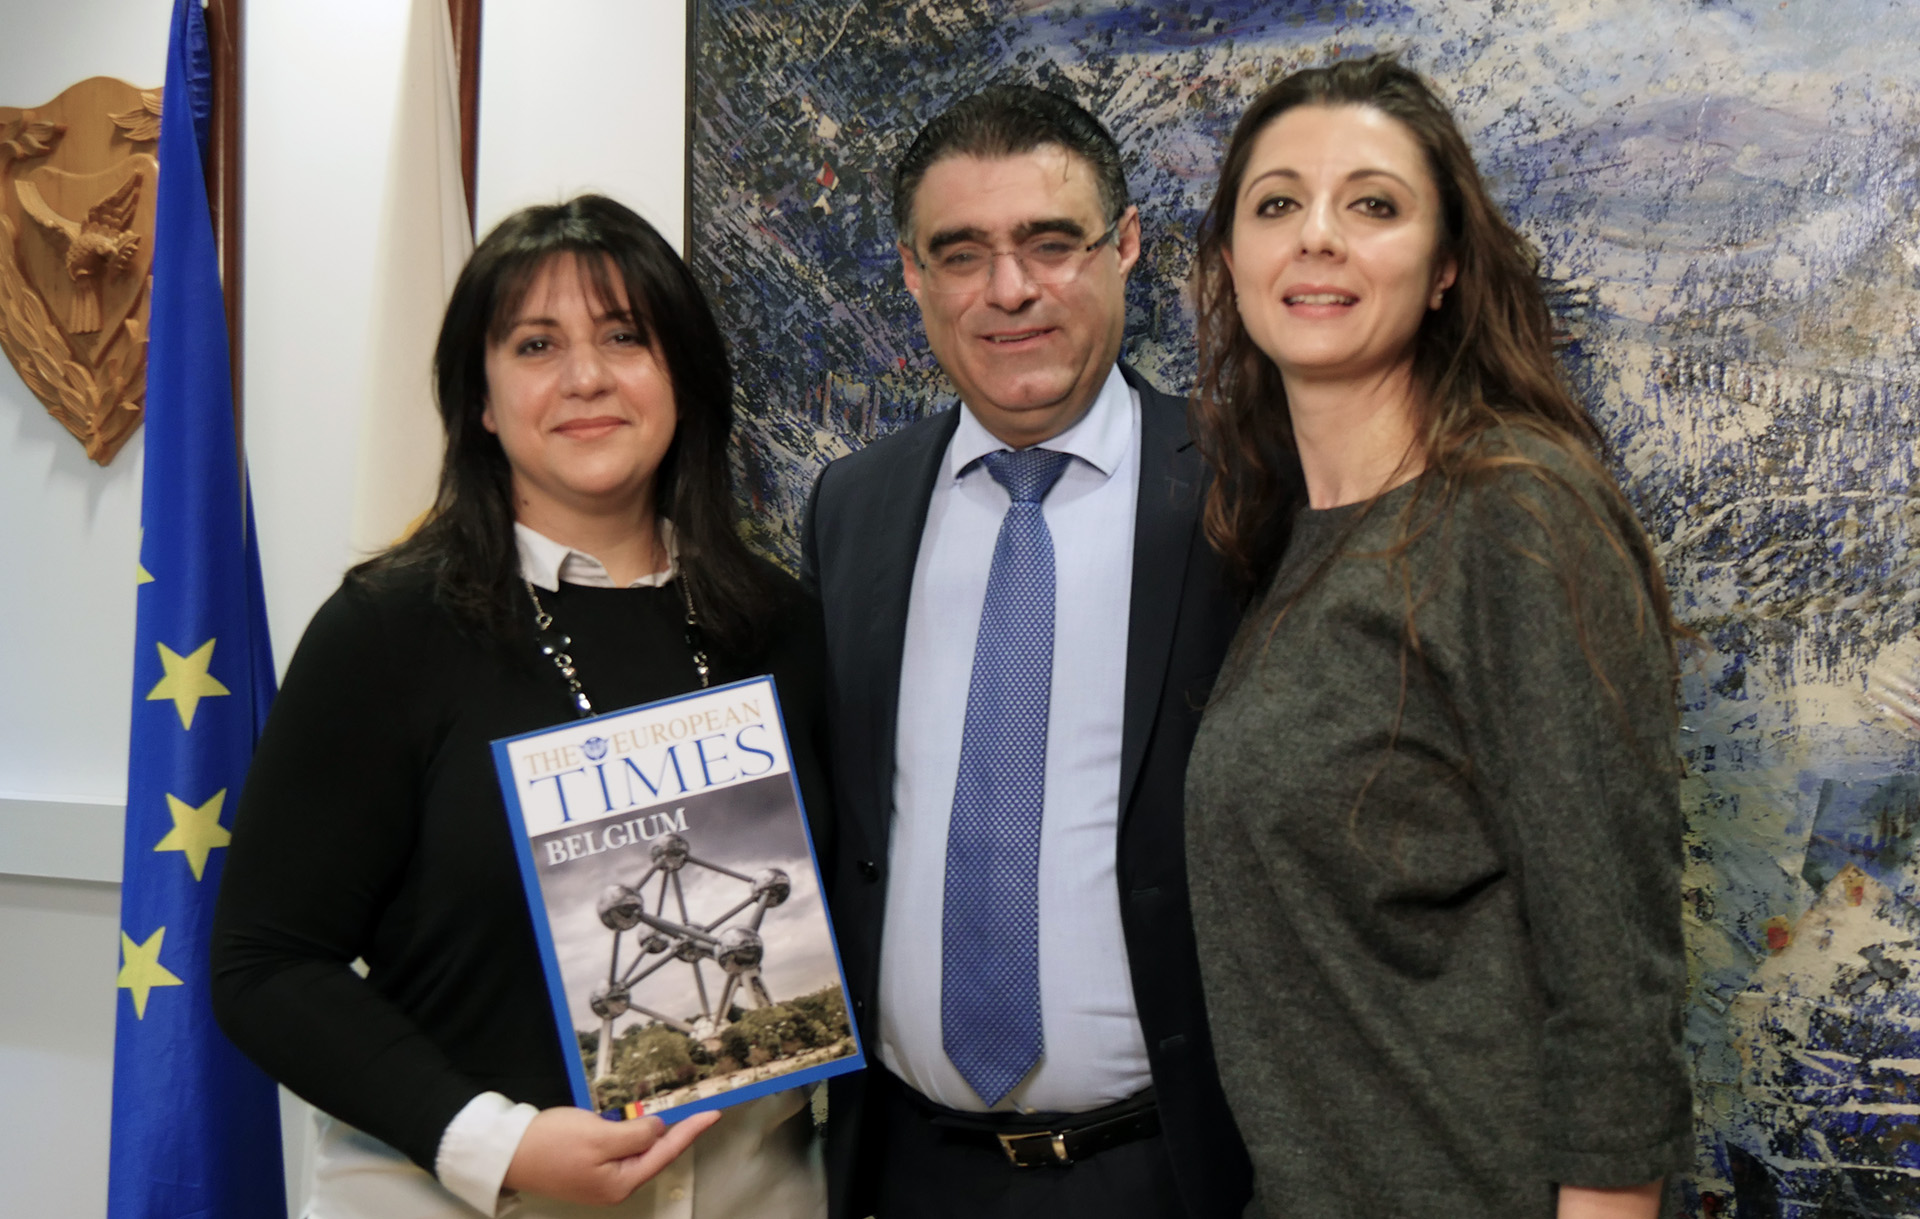 The European Times Cyprus team together with Nicos Kouyialis, Minister of Agriculture